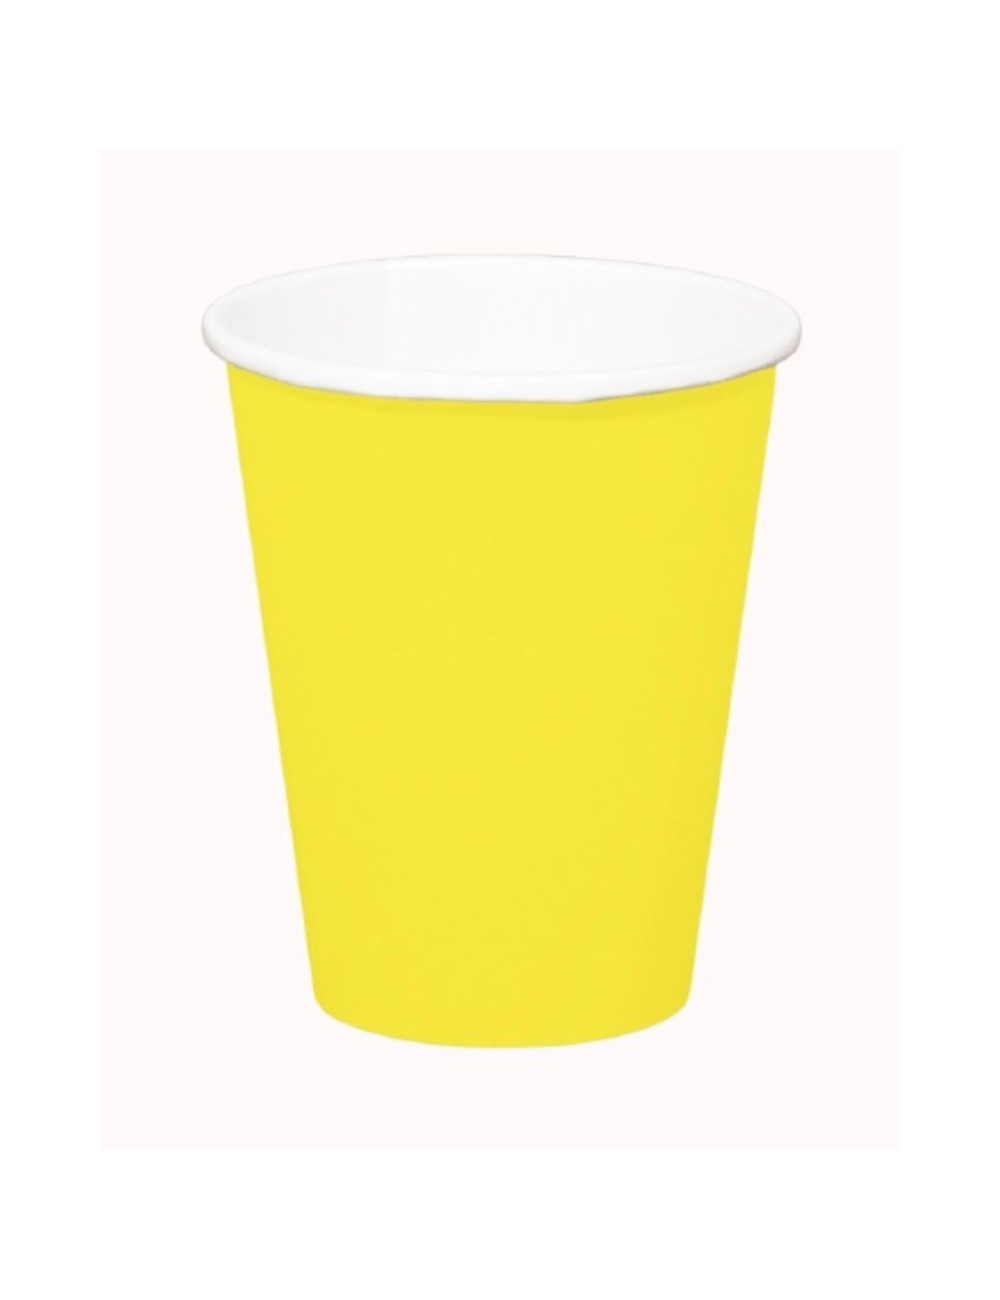 8 Yellow cups